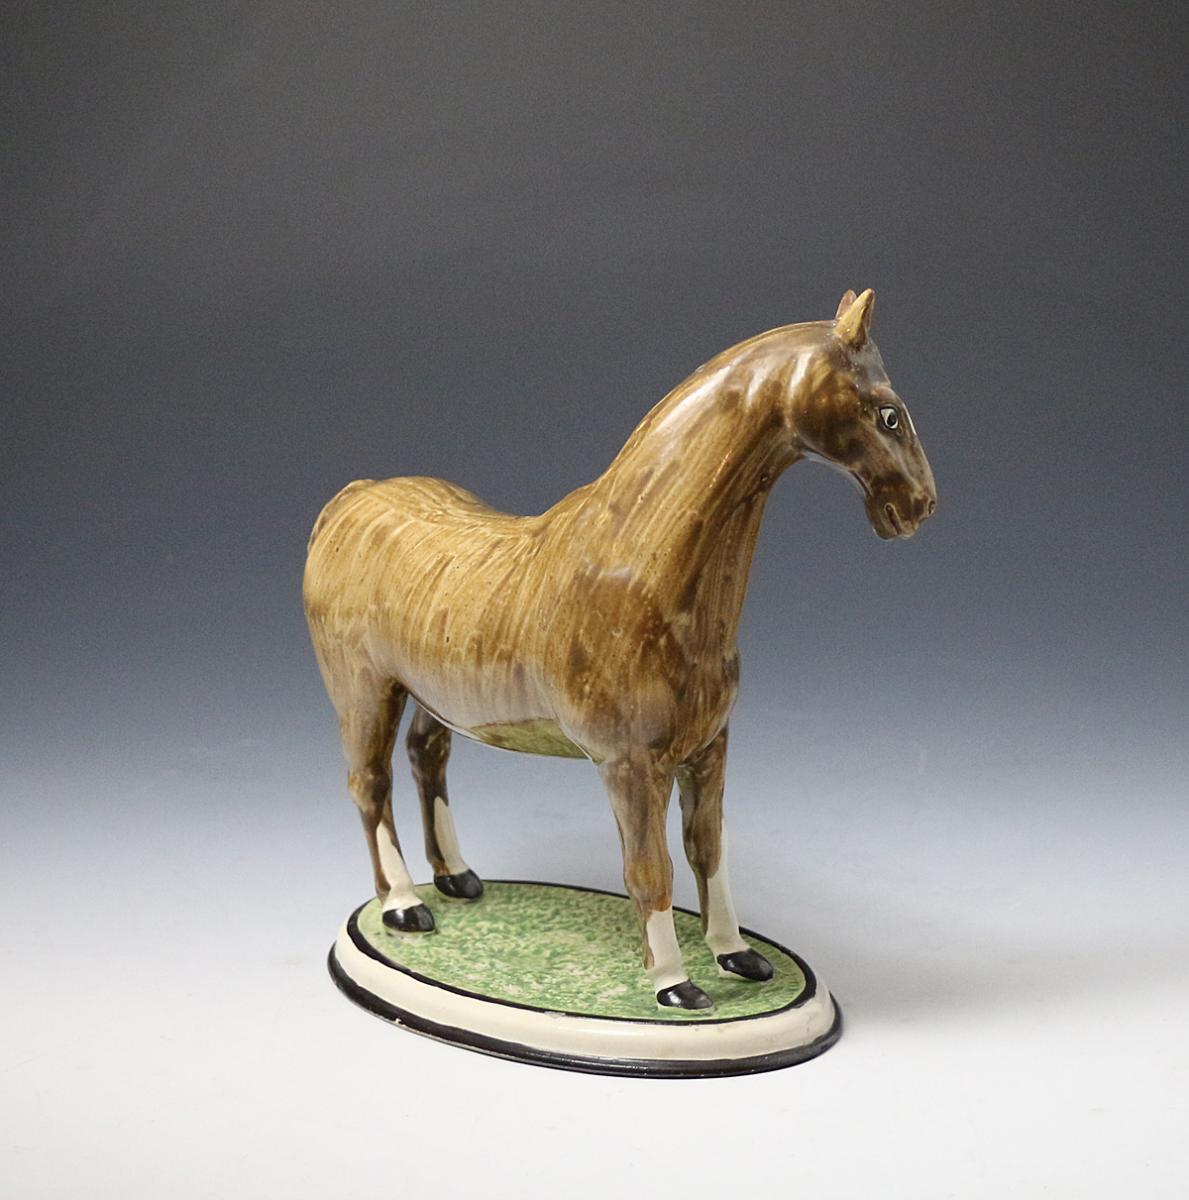 Pottery figure of a horse standing on an oval shaped base made England circa 1800